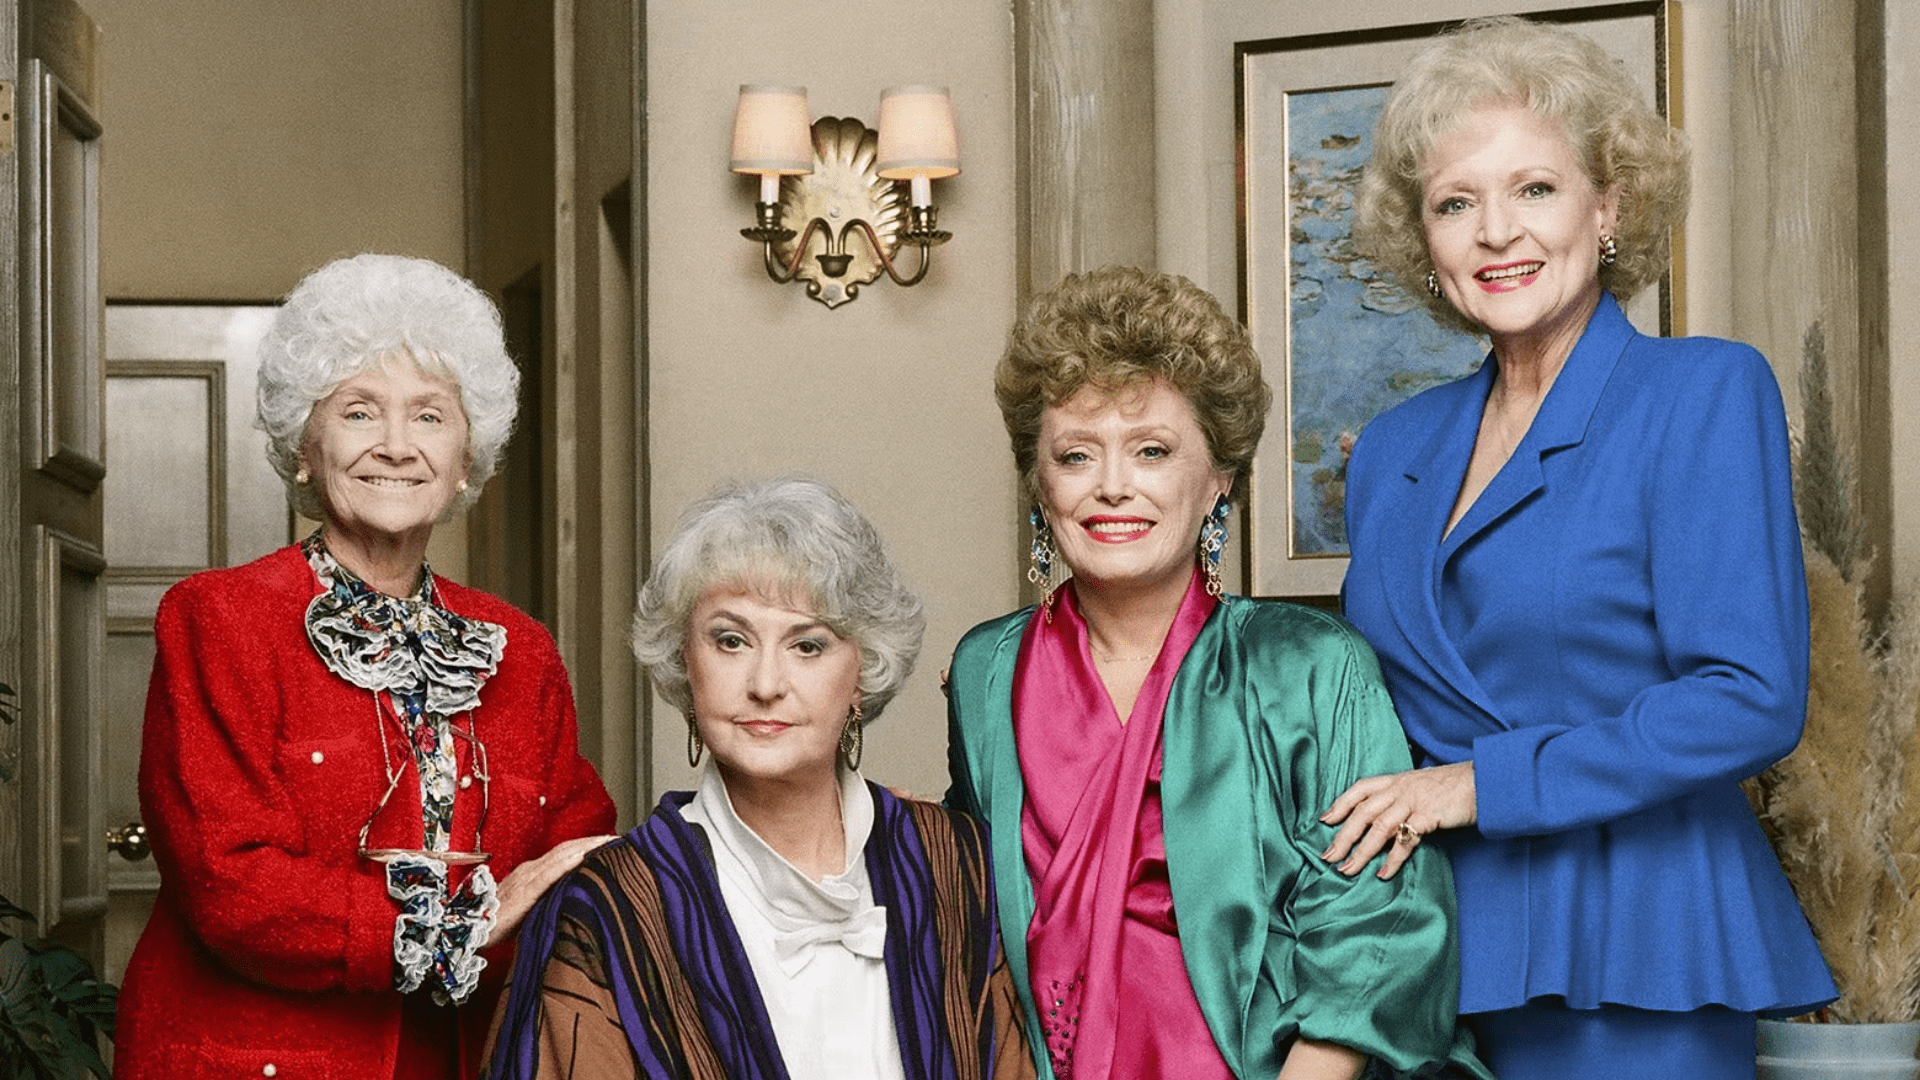 The Golden Girls Facts - Ultimate List Of 117 The Golden Girls Facts For All Classic Sitcom Lovers